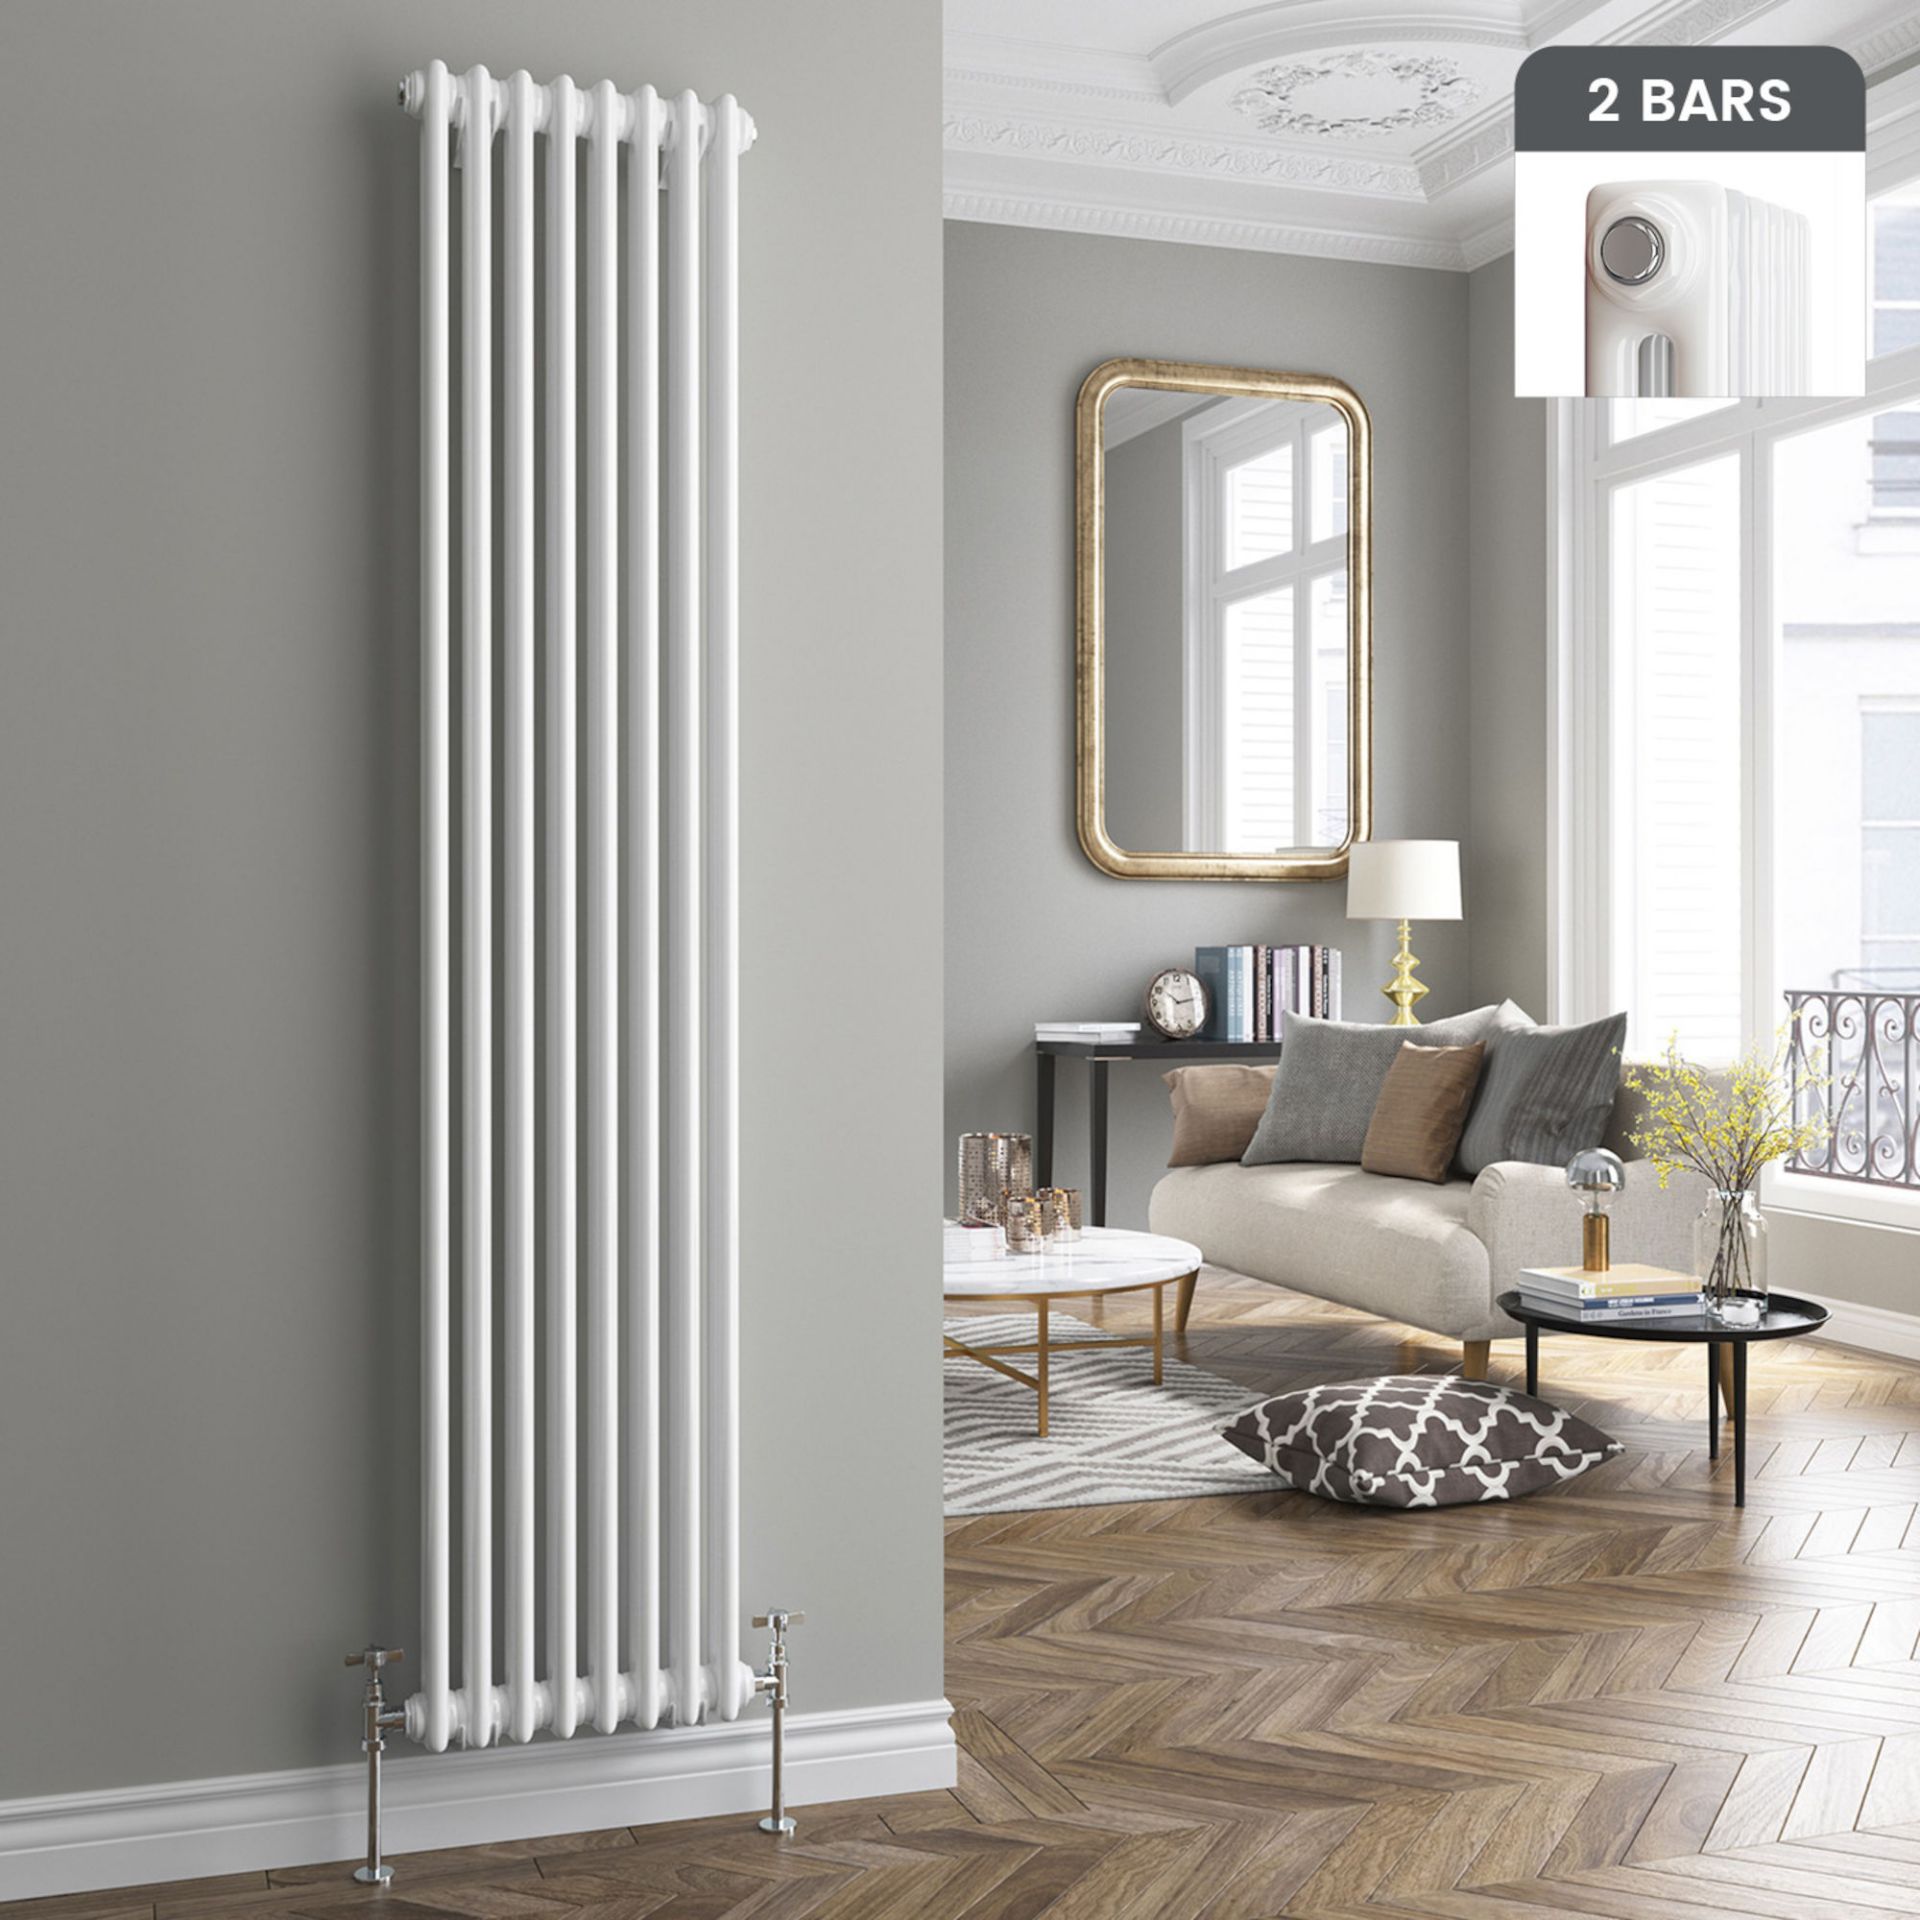 (DD112) 2000x350mm White Double Panel Vertical Colosseum Traditional Radiator. RRP £429.99. Fo...(